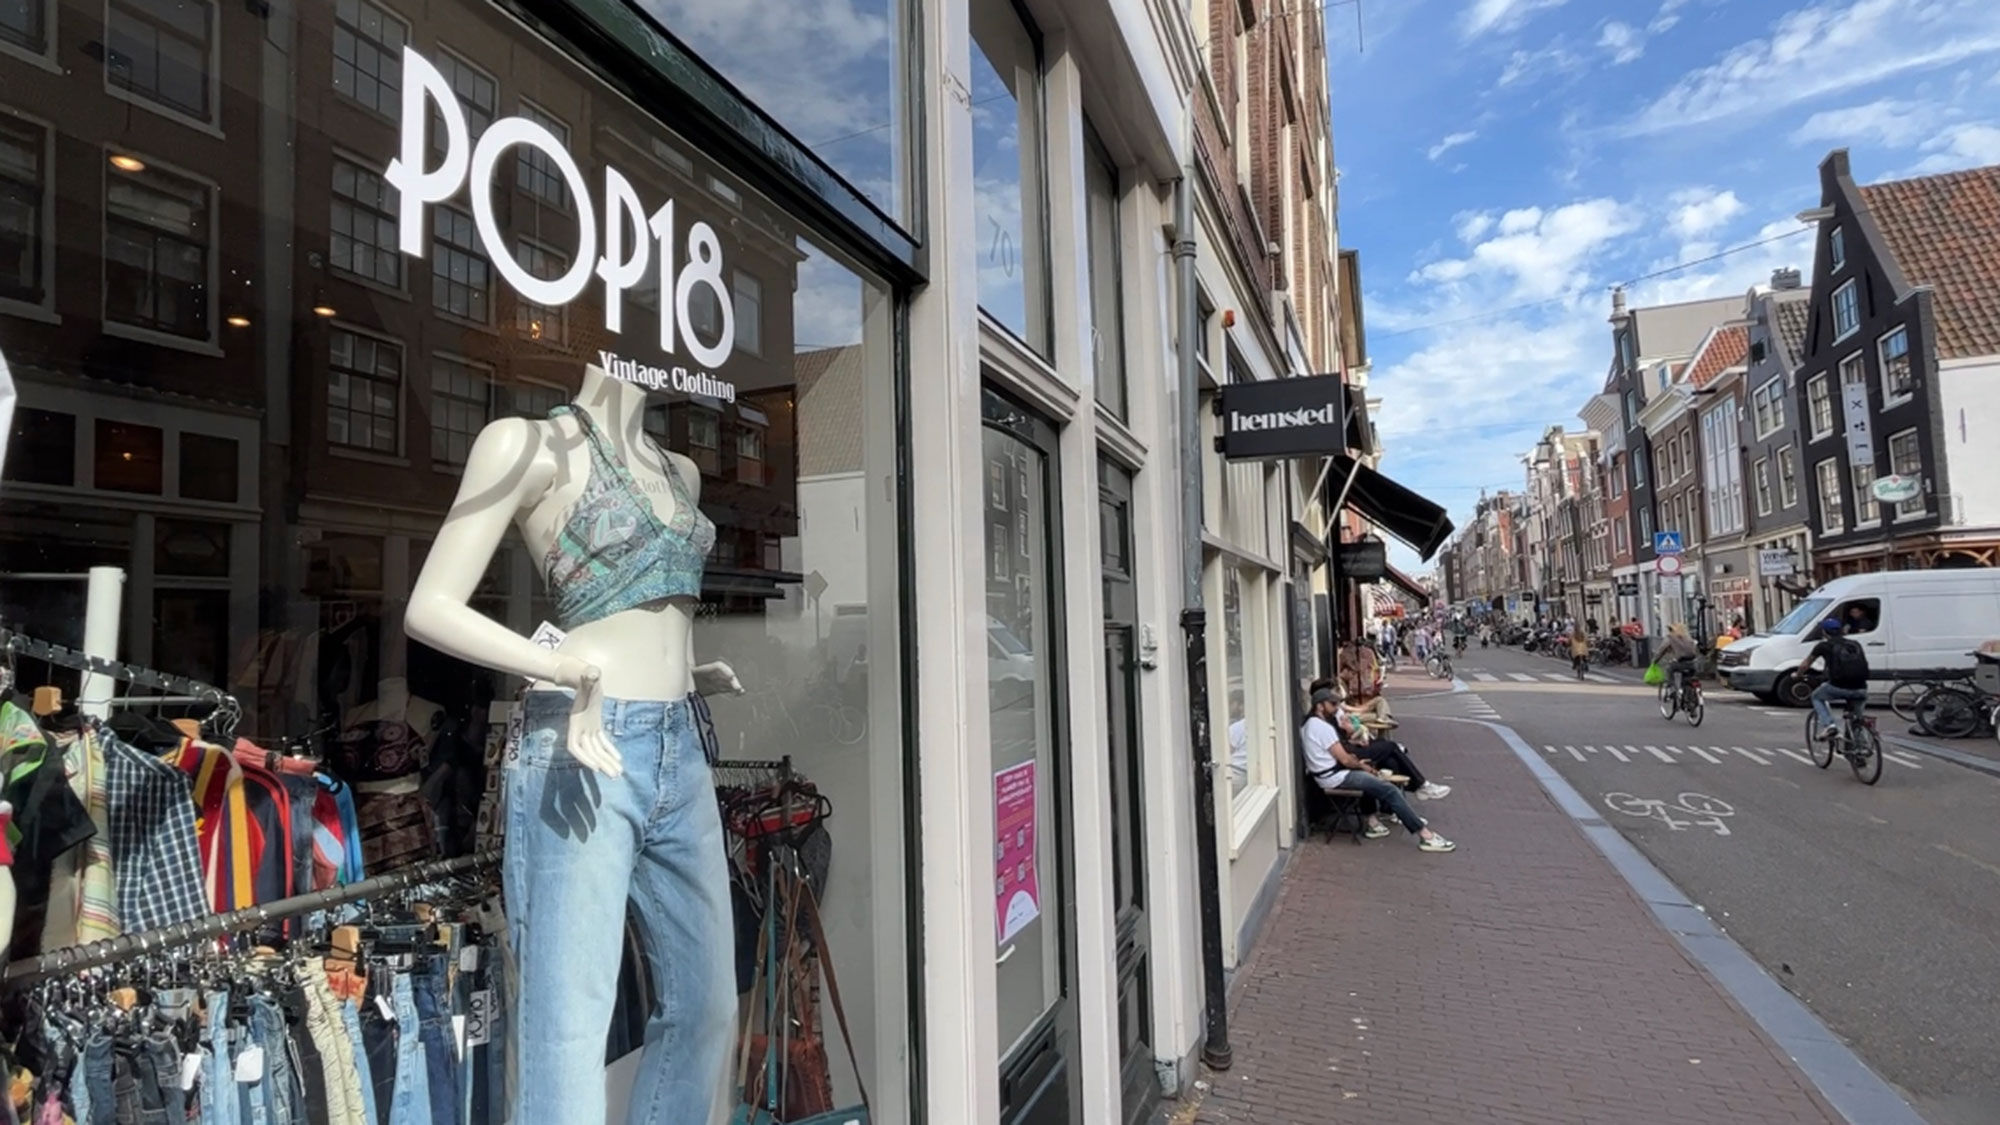 There was no shortage of vintage clothing stores in Amsterdam.